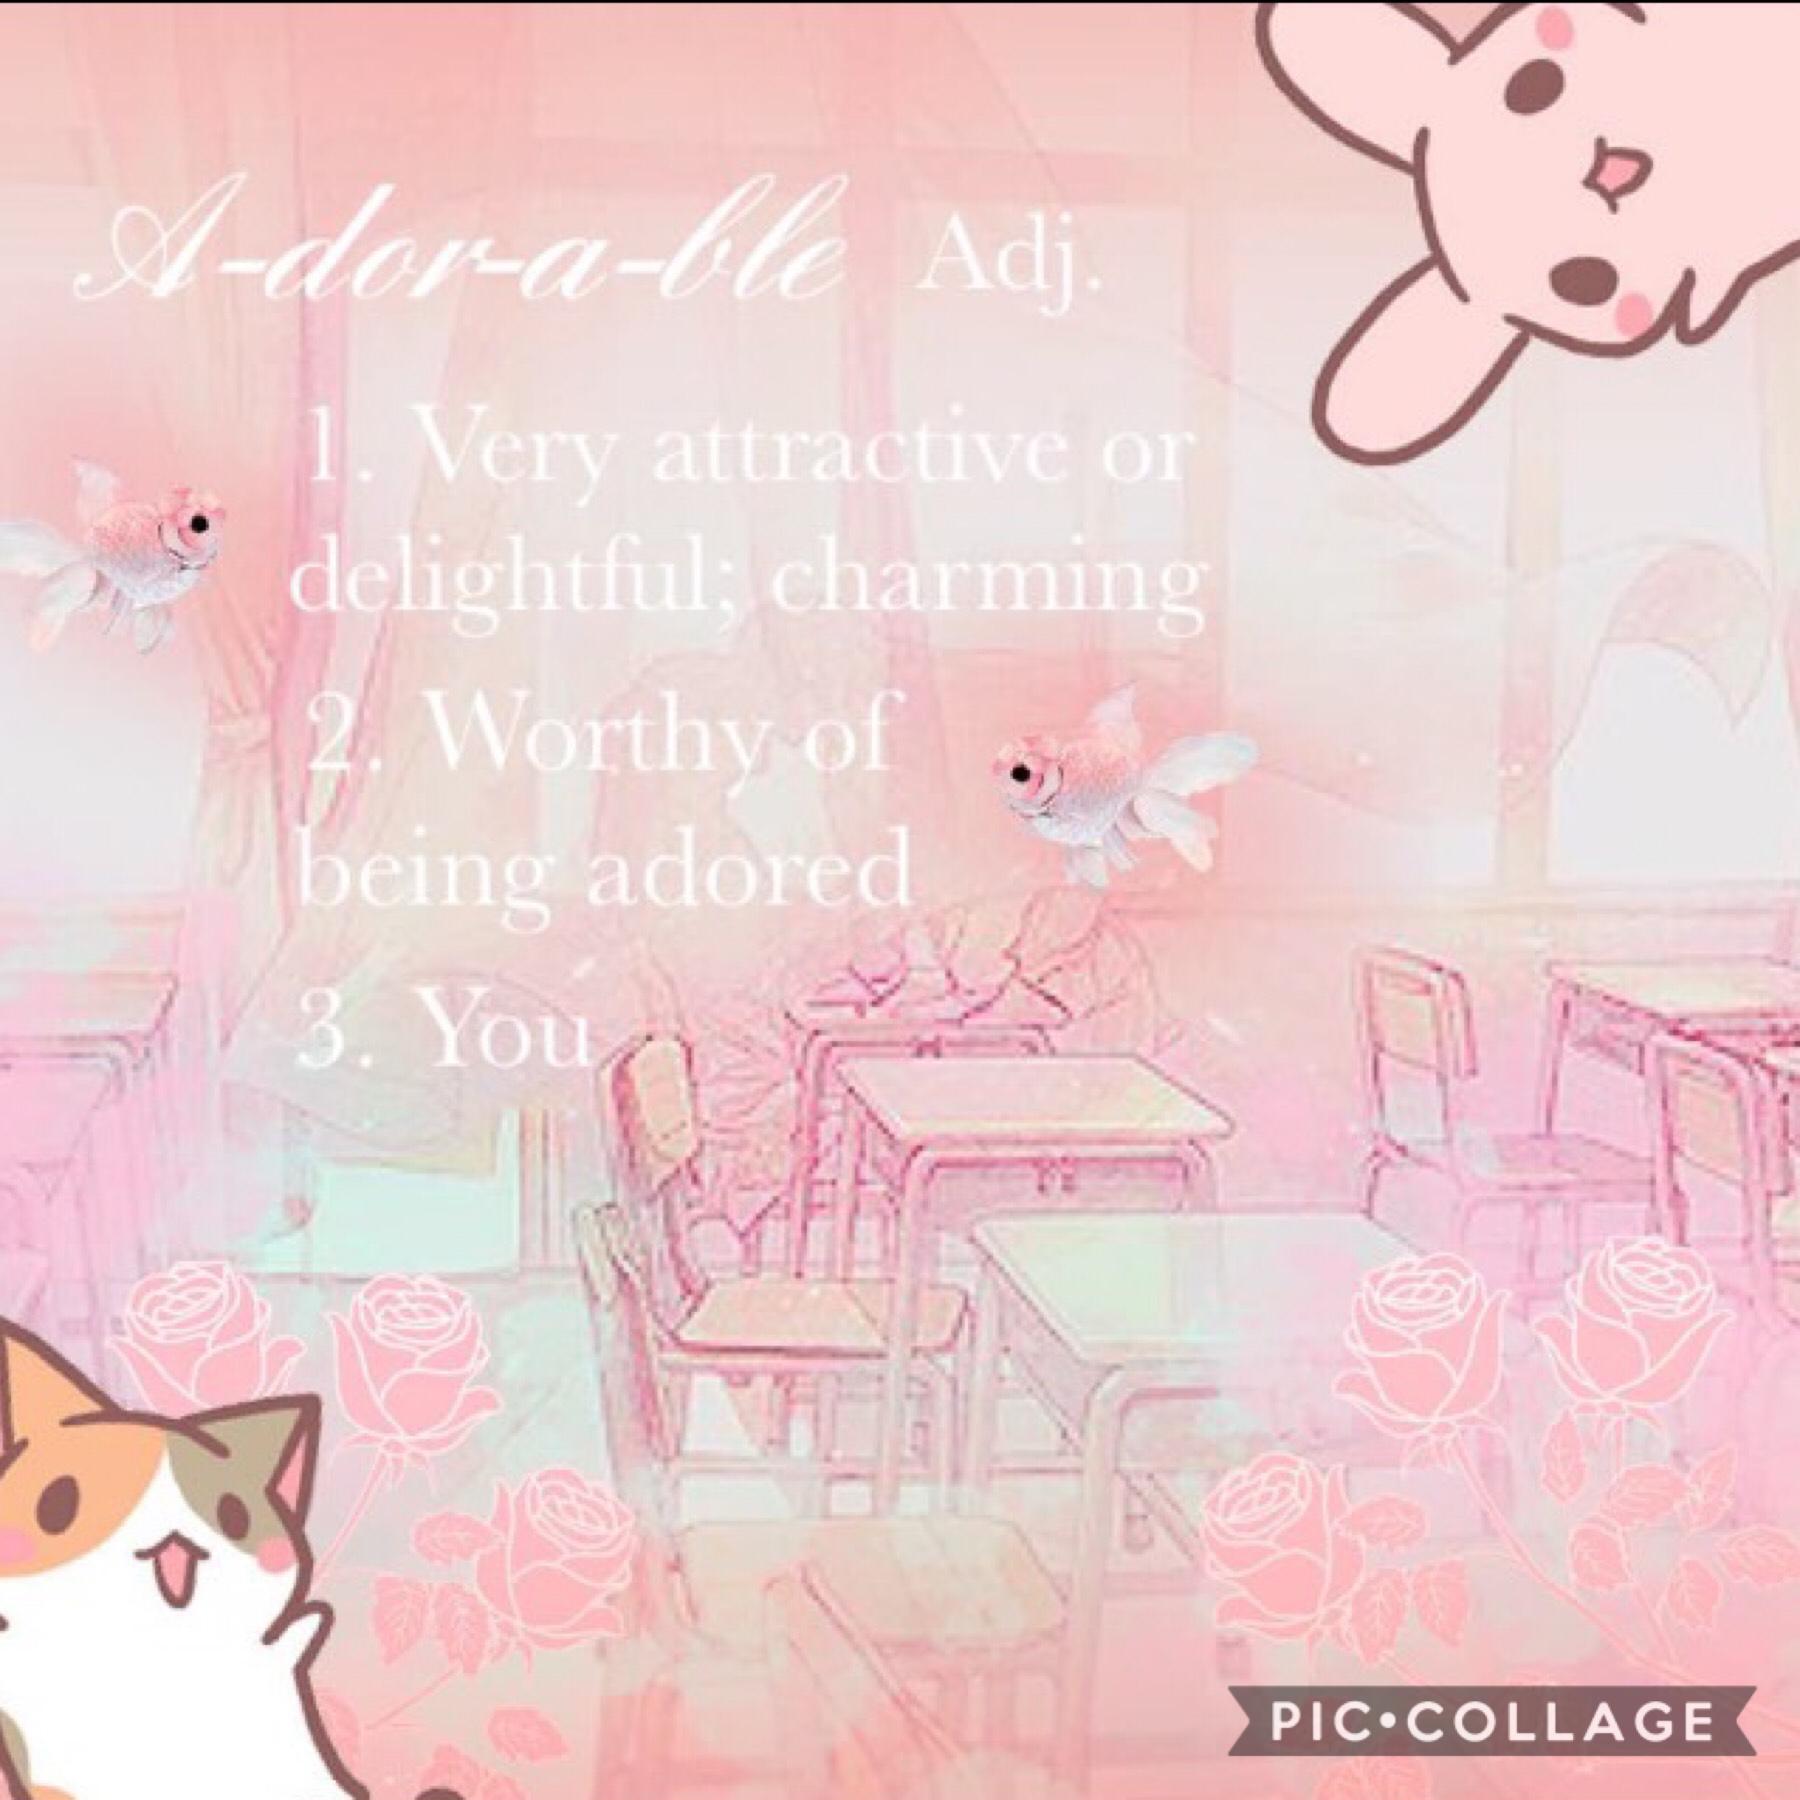 This is yet another contest entry I did for I-need-a-laifu’s kawaii contest thing (hope I got that username right) and I think it’s cute. Kinda simple, but cute (ᴸᴵᴷᴱ ᴹᴱ)